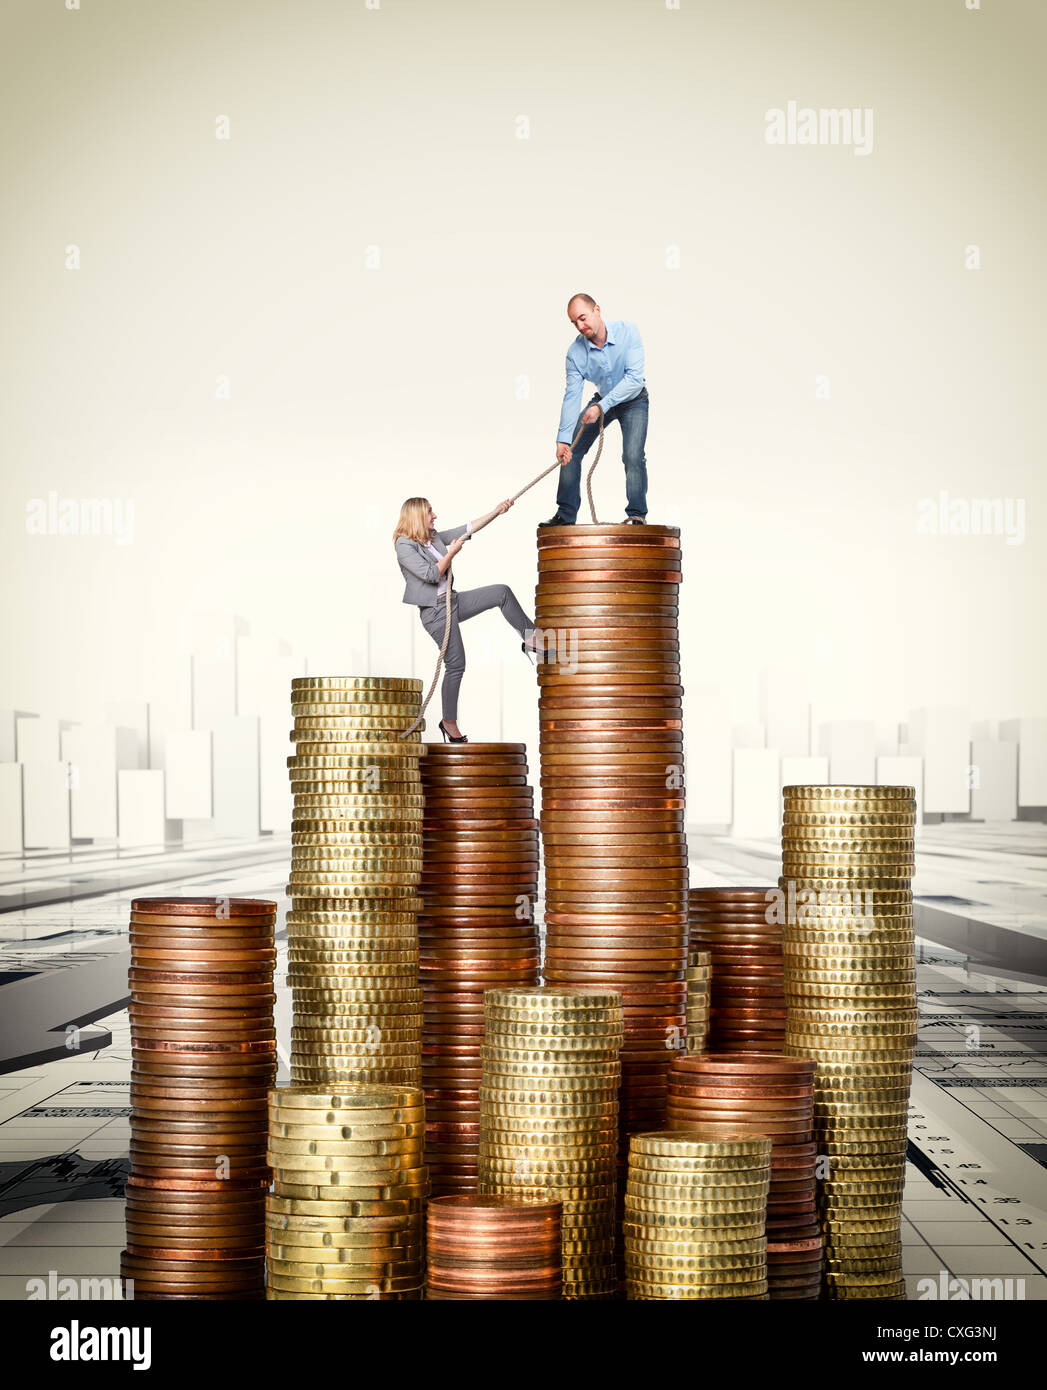 man and woman on euro coin pile Stock Photo